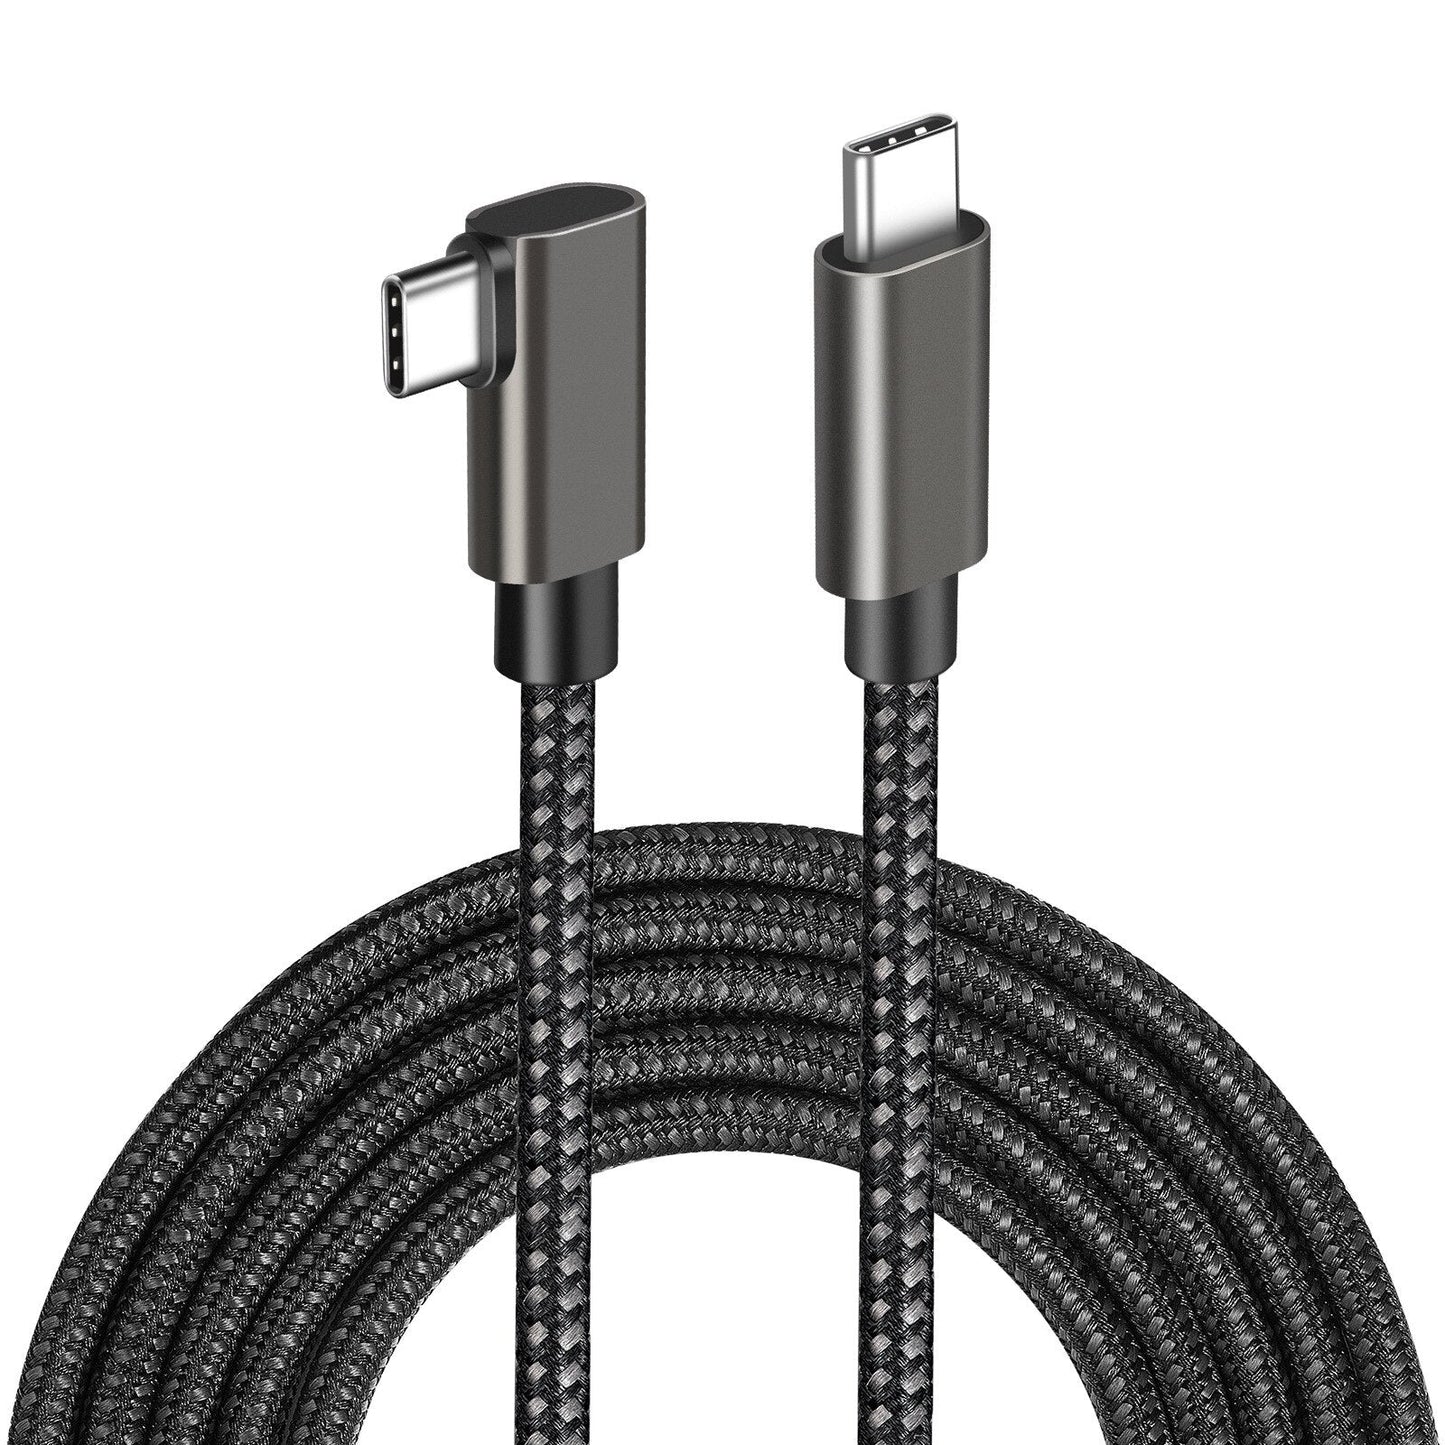 Oculus Quest 2 Link Cable 16FT, VR Headset Cable for Quest 1, USB 3.0 Type C to C High Speed Data Transfer Charging Cord-Shalav5